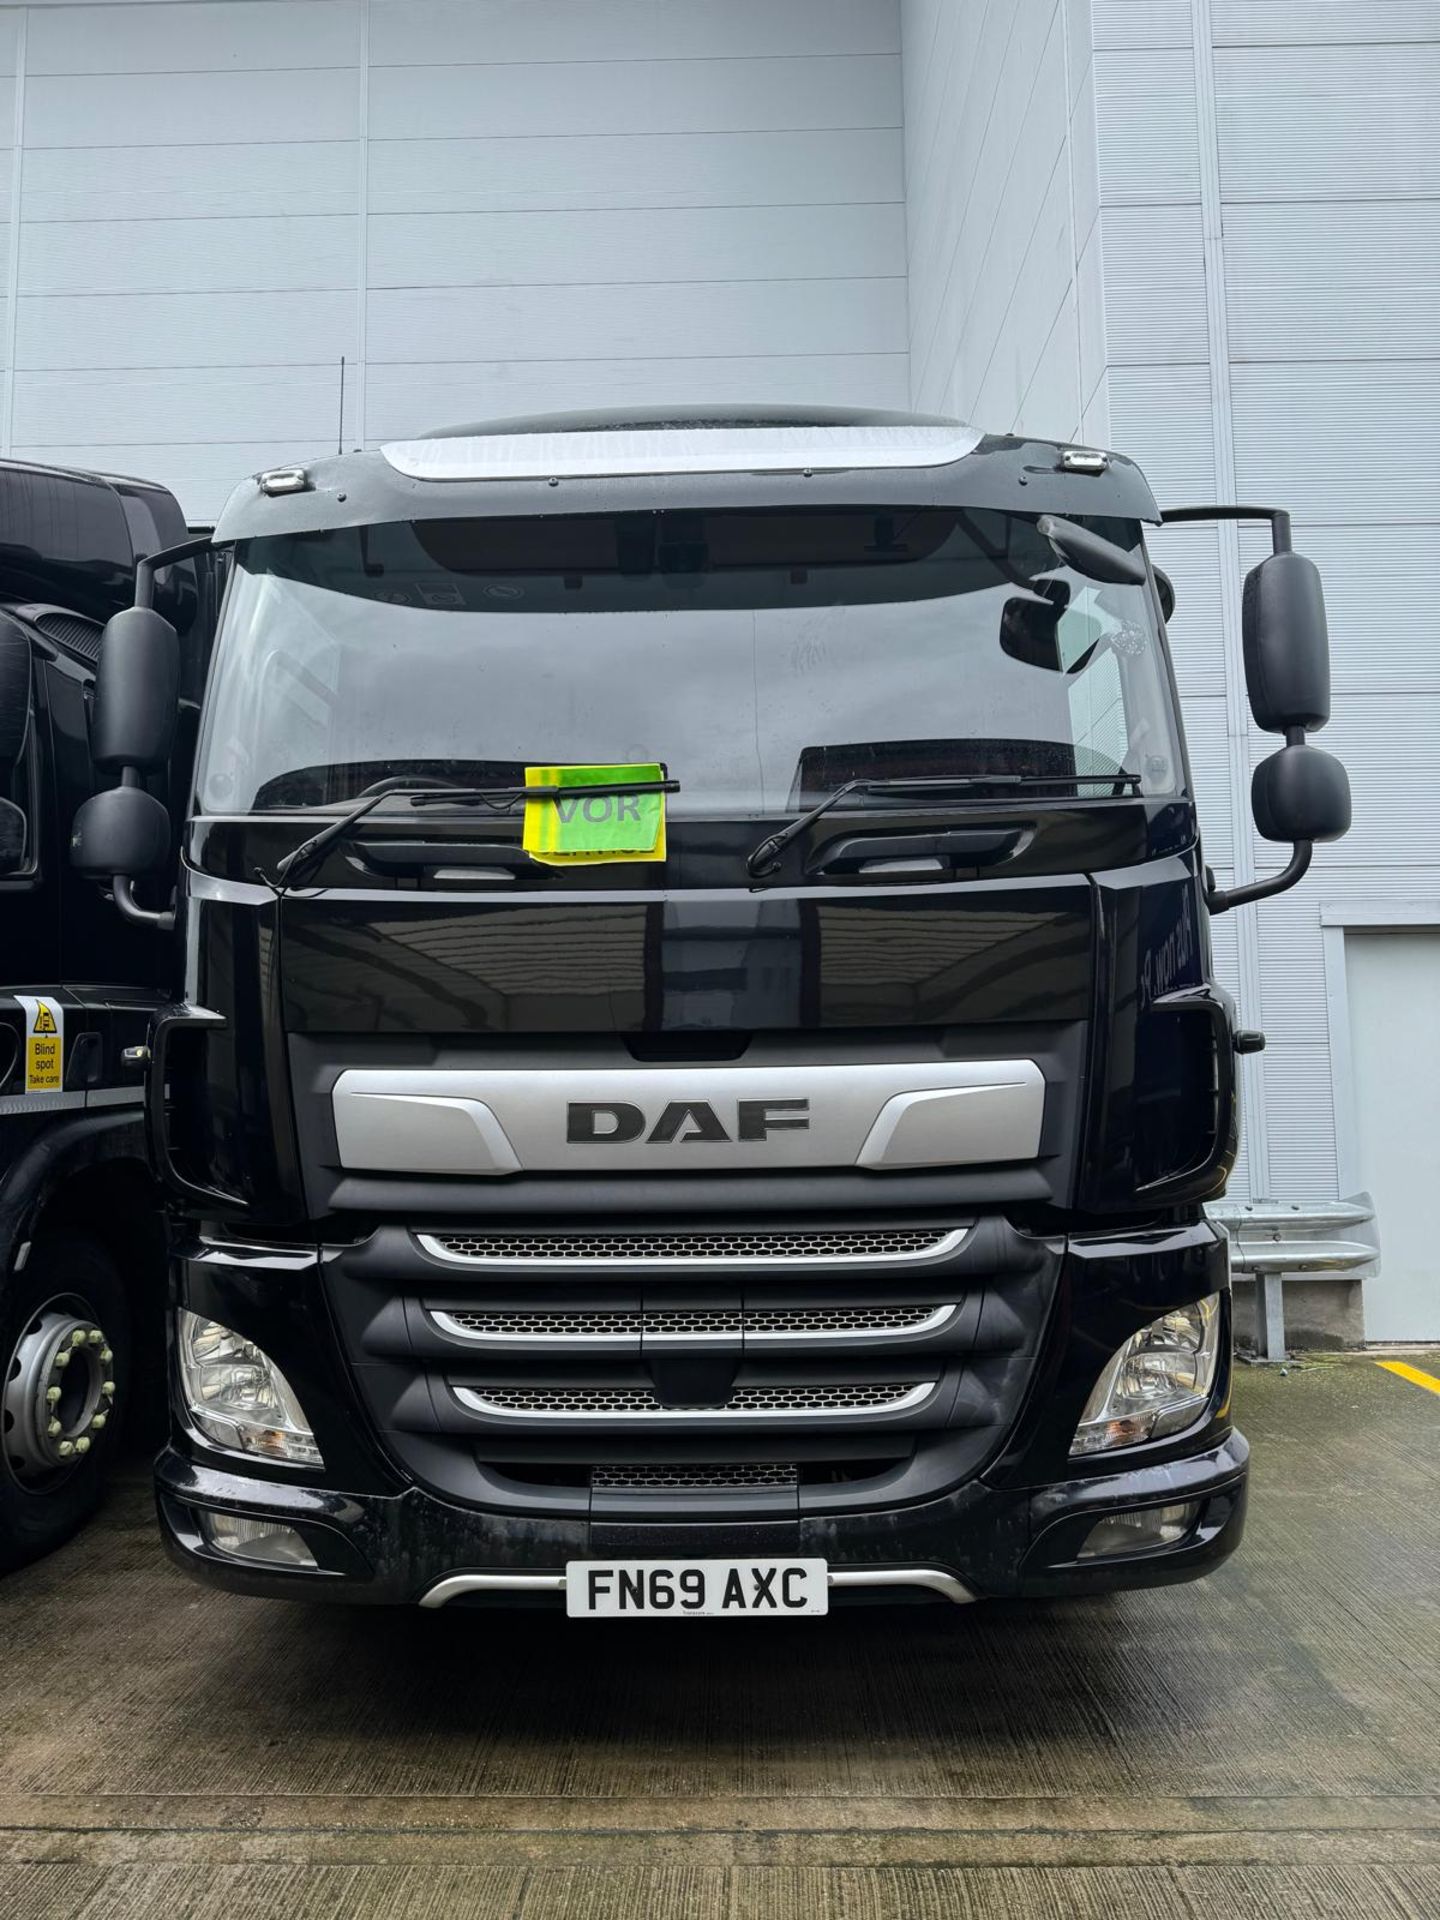 2019, DAF CF 260 FA (Ex-Fleet Owned & Maintained) - FN69 AXC (18 Ton Rigid Truck with Tail Lift) - Image 3 of 17